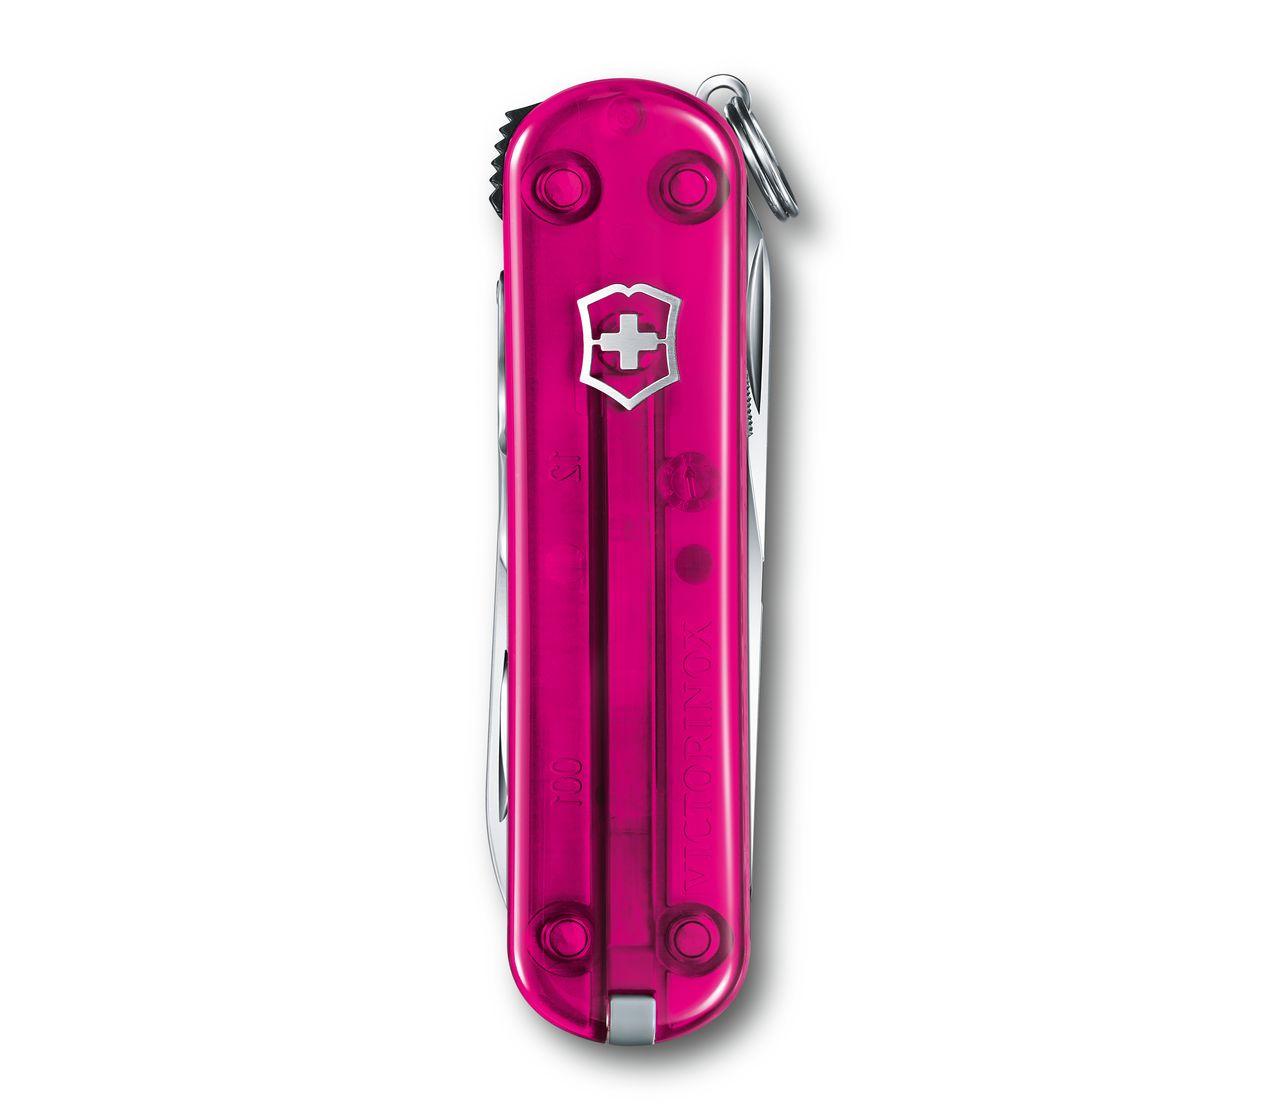 Victorinox Nail Clipper 582 Swiss Army Pocket Nail Clip - Red in